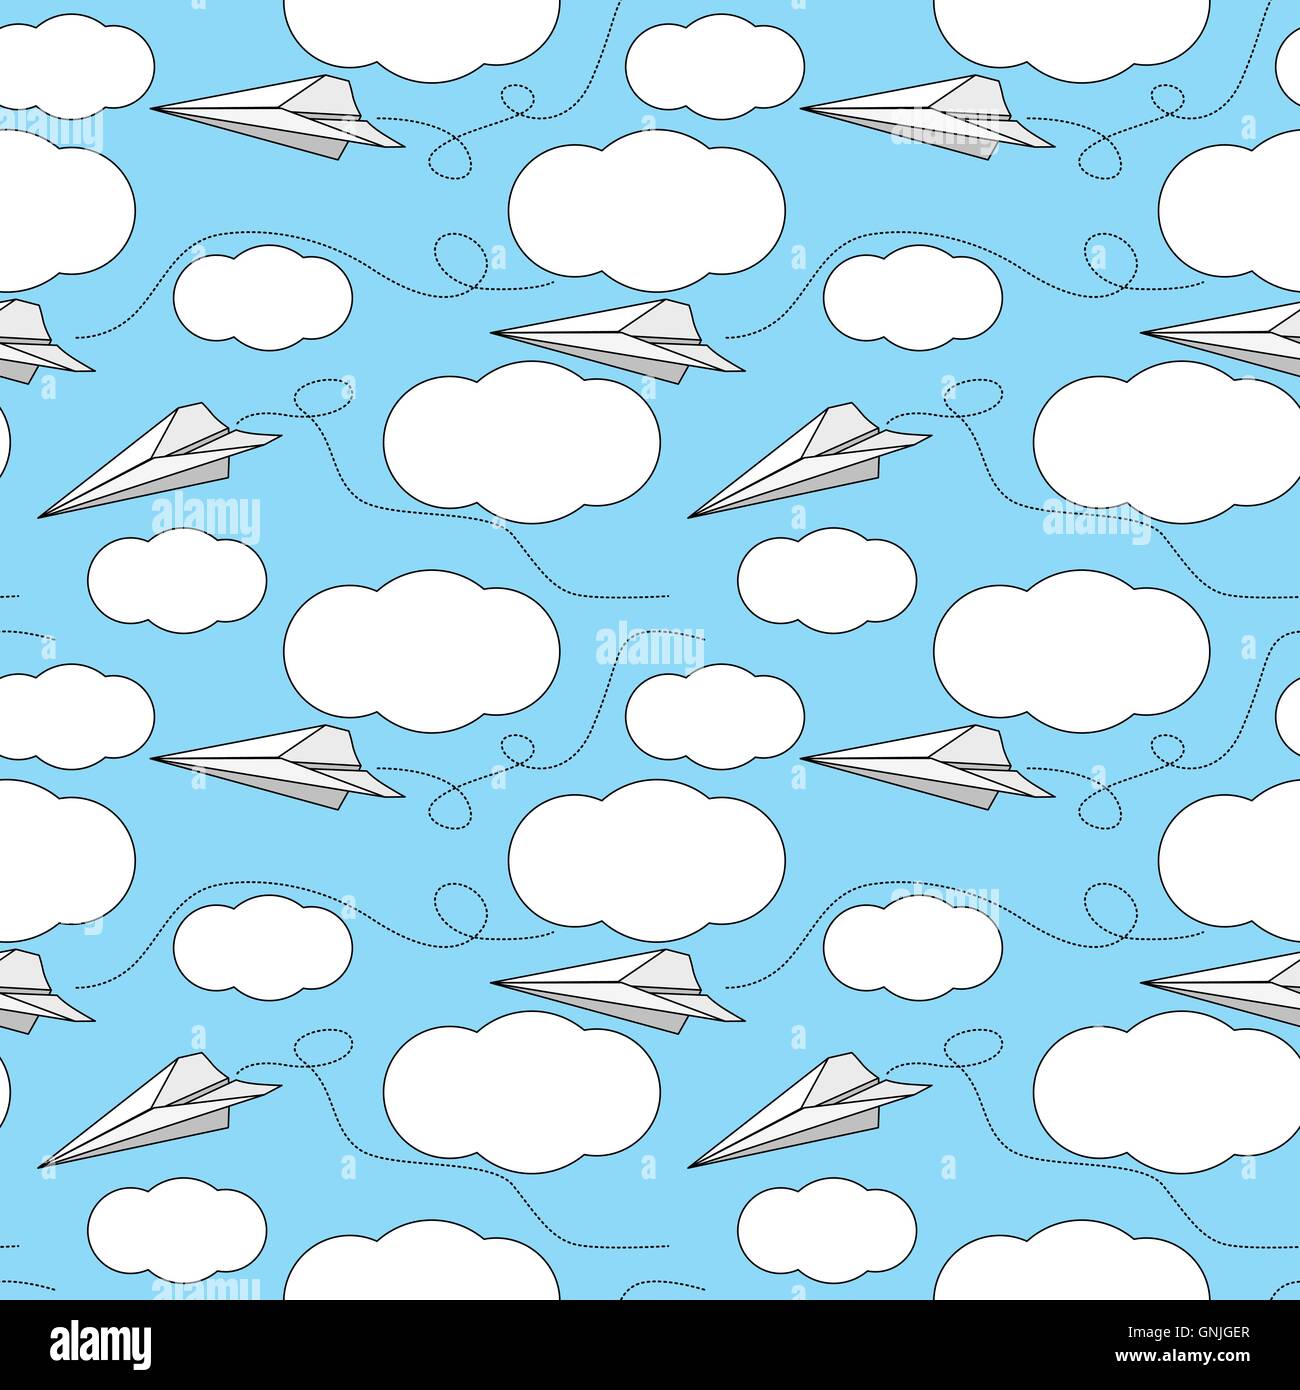 Seamless paper airplane pattern Stock Vector